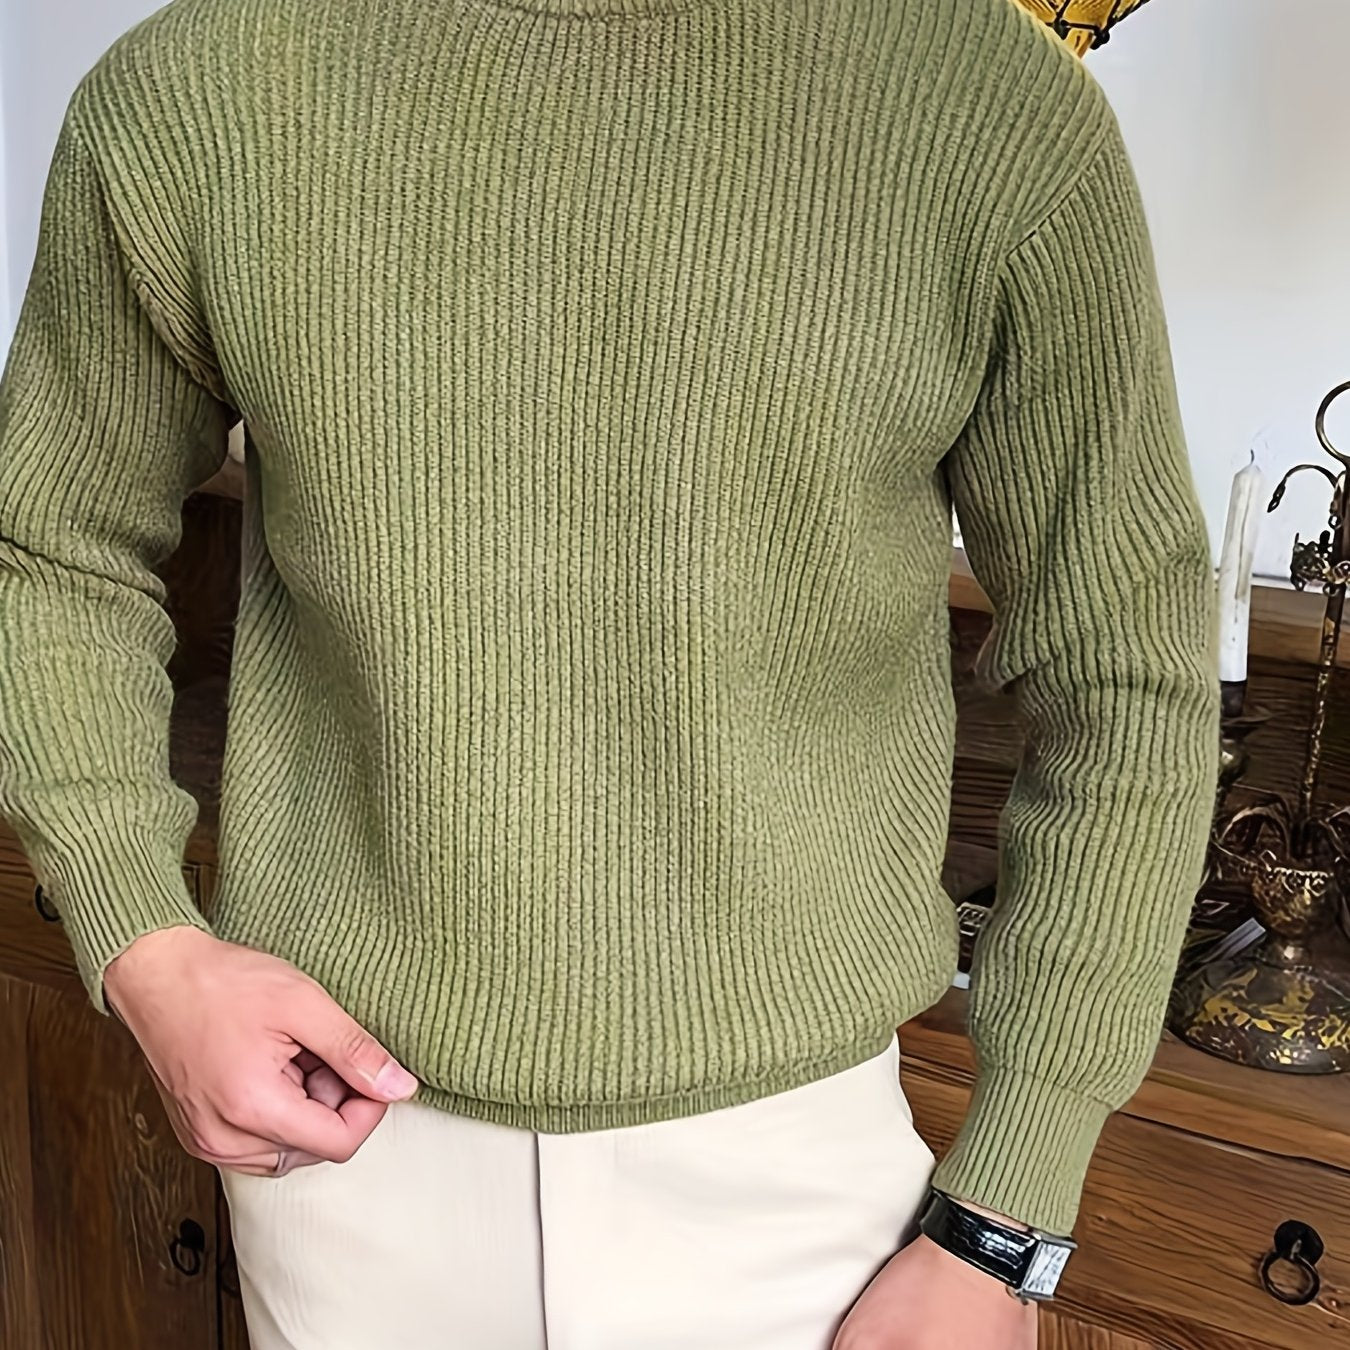 Foruwish - Warm Texture Knitted Sweater, Men's Casual Solid Color Slightly Stretch Round Neck Pullover Sweater For Fall Winter